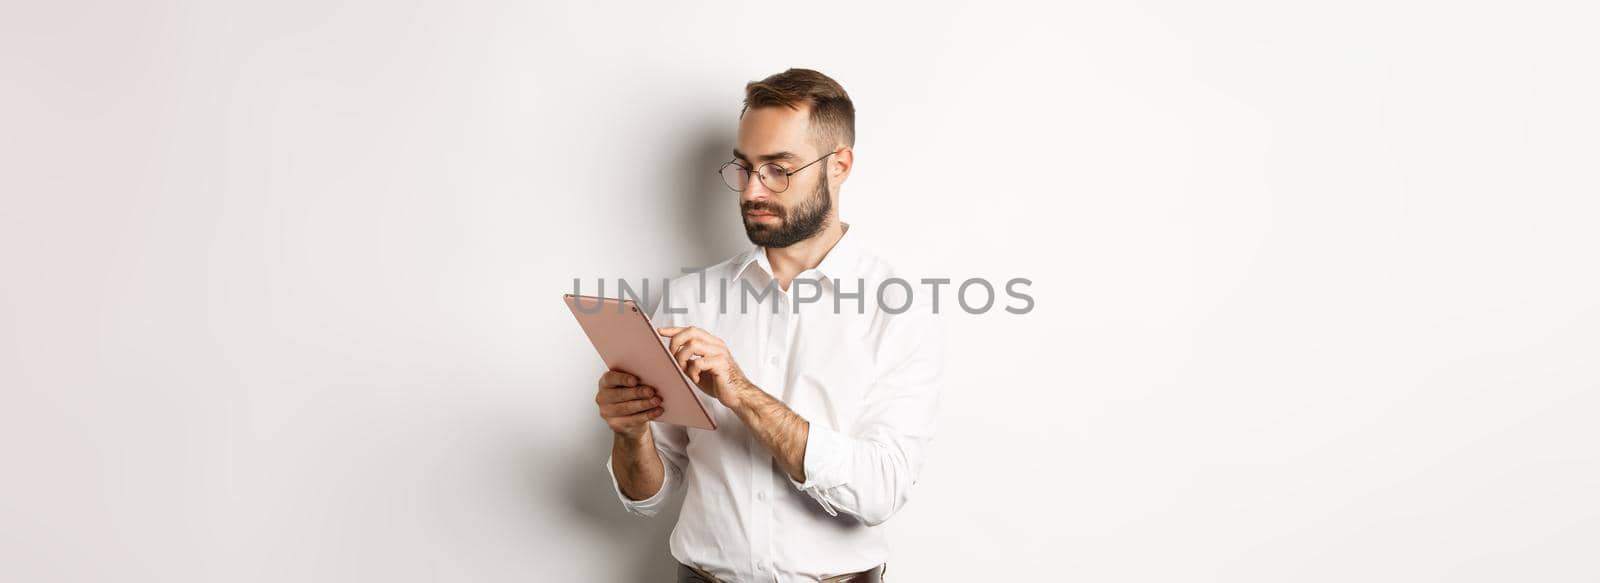 Businessman working on digital tablet, looking busy, standing over white background.